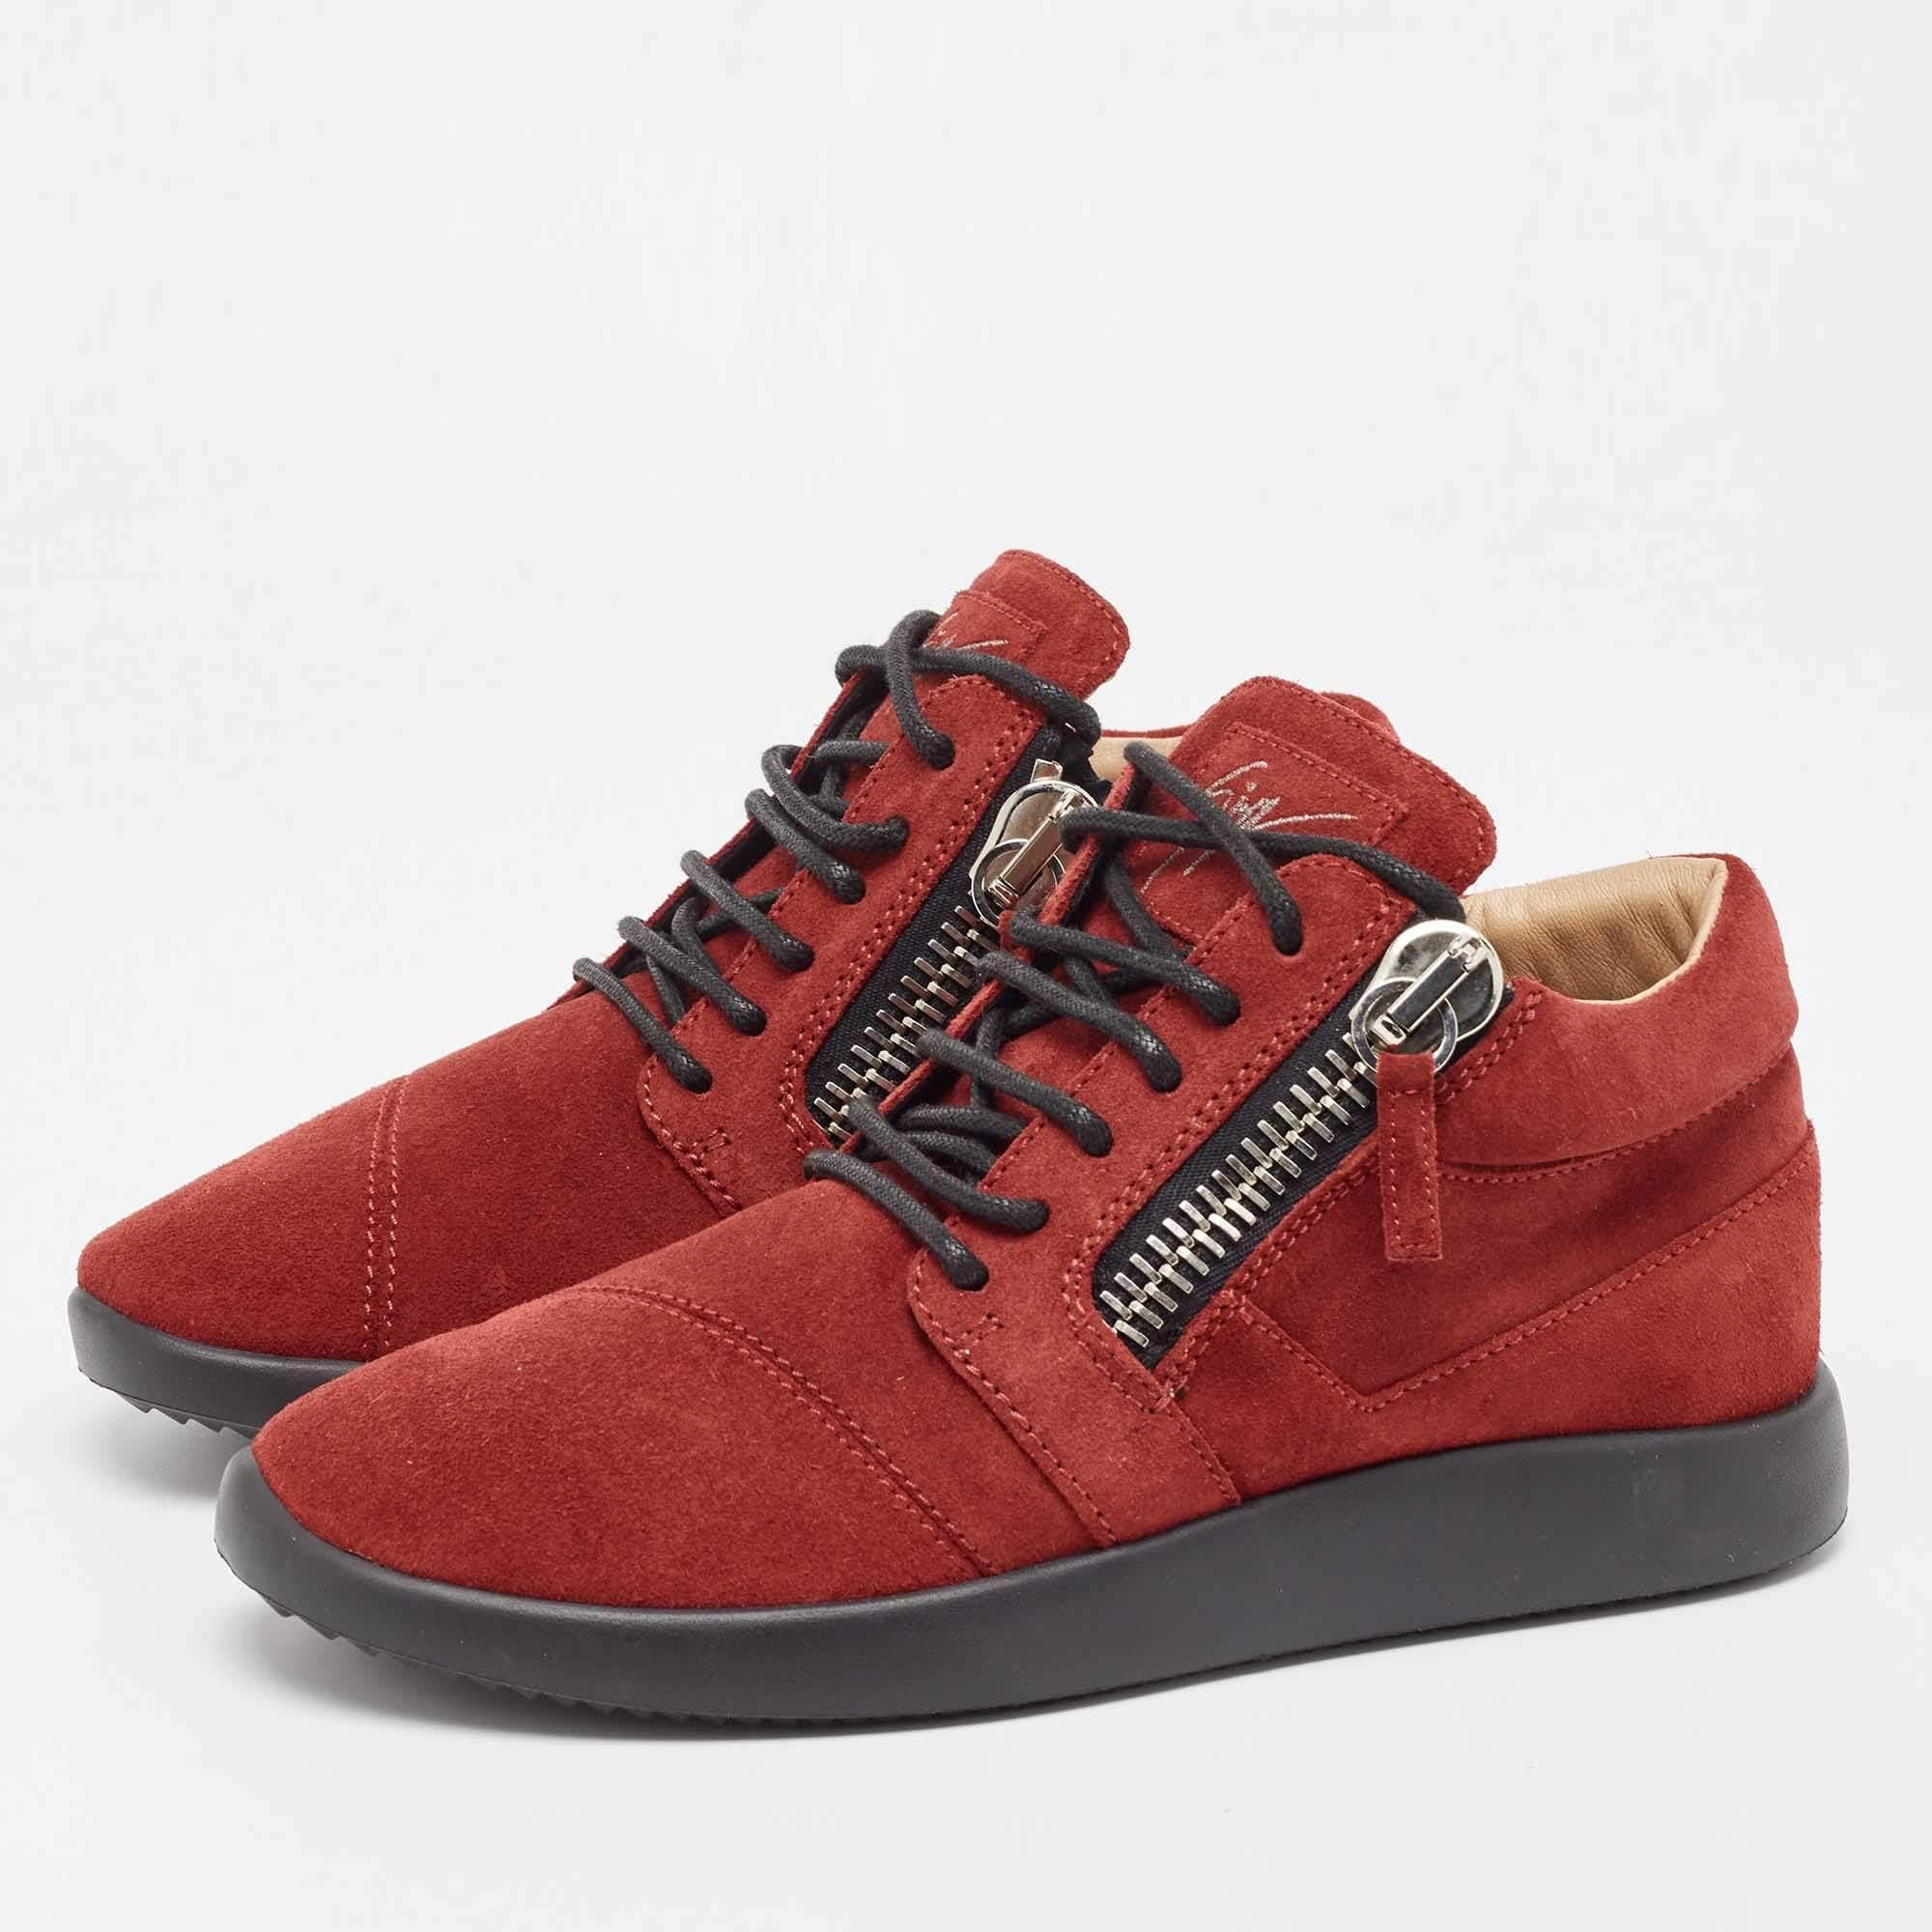 Gisueppe Zanotti Red Suede Double Zip Low Top Sneakers Size 38 For Sale 1